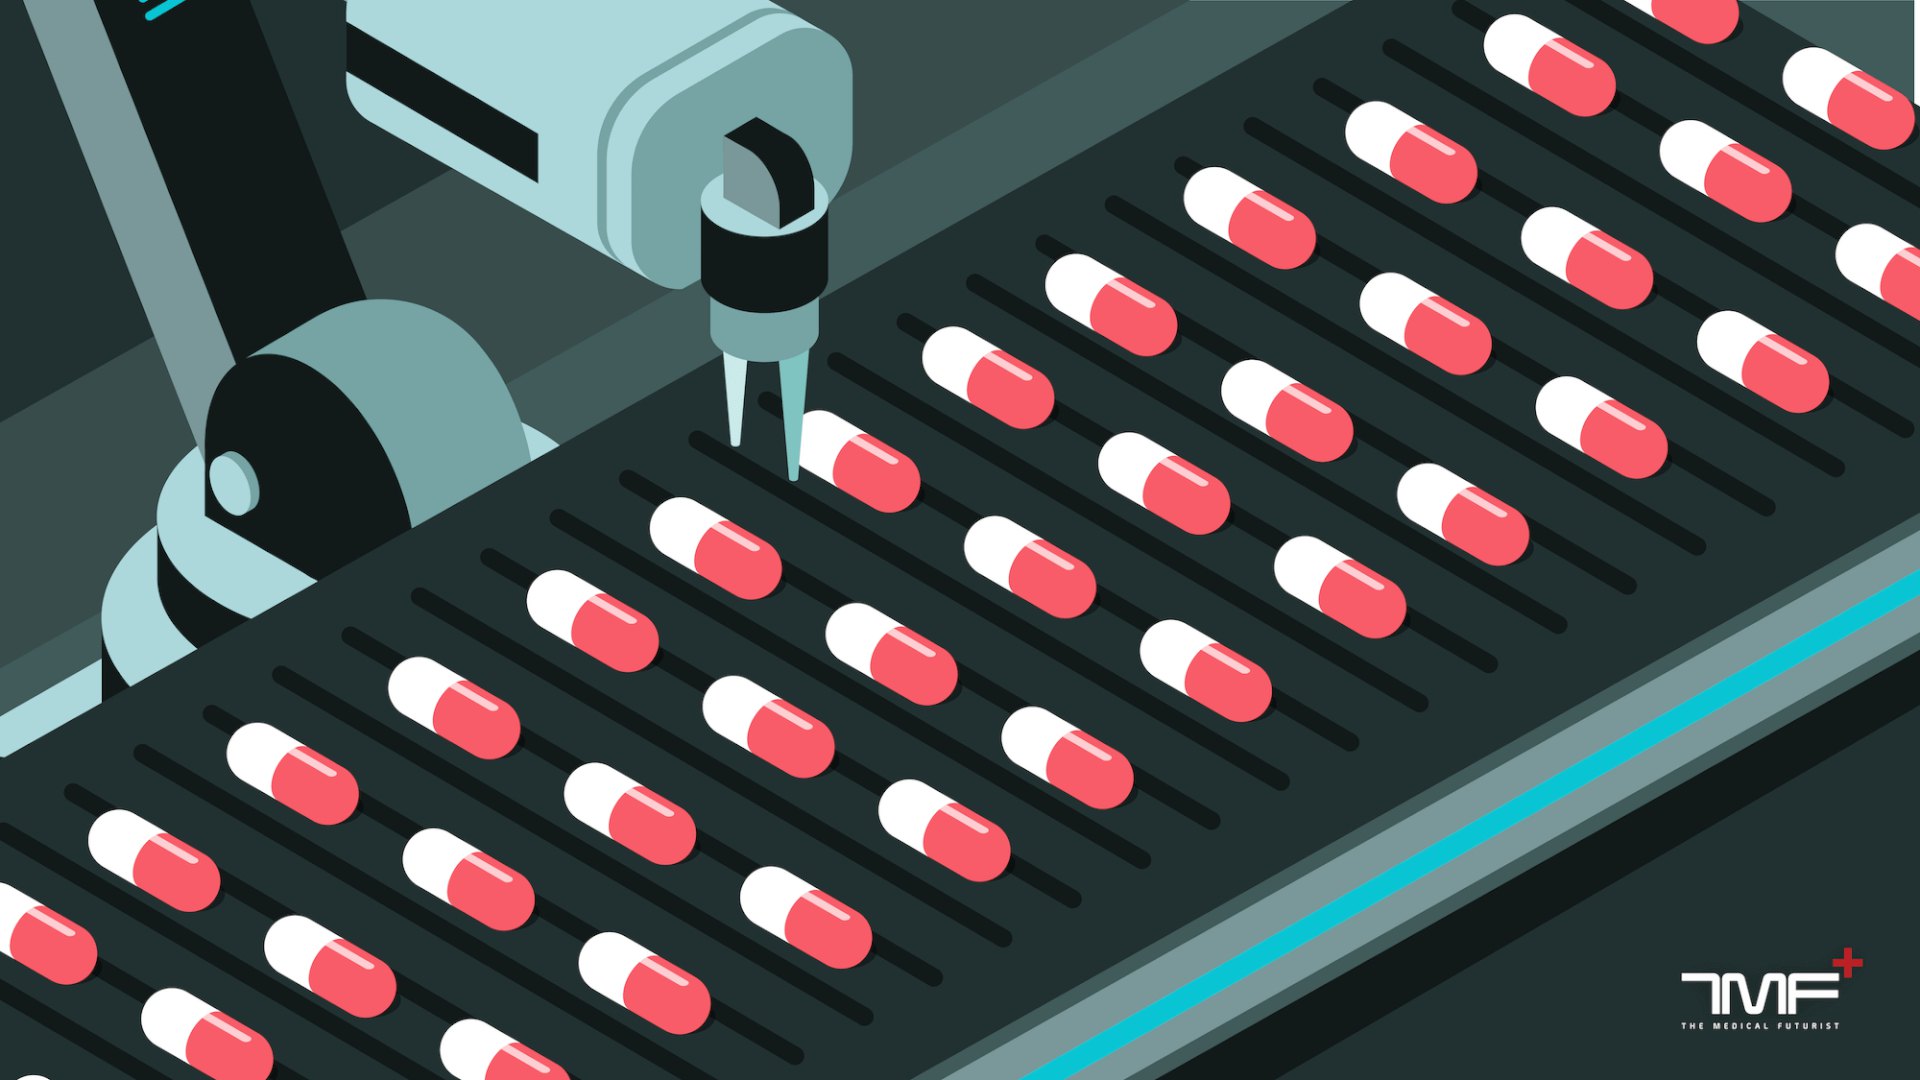 From Drug Design To Distribution: This Is How Robotics, A.I. and Blockchain Transforms Pharma